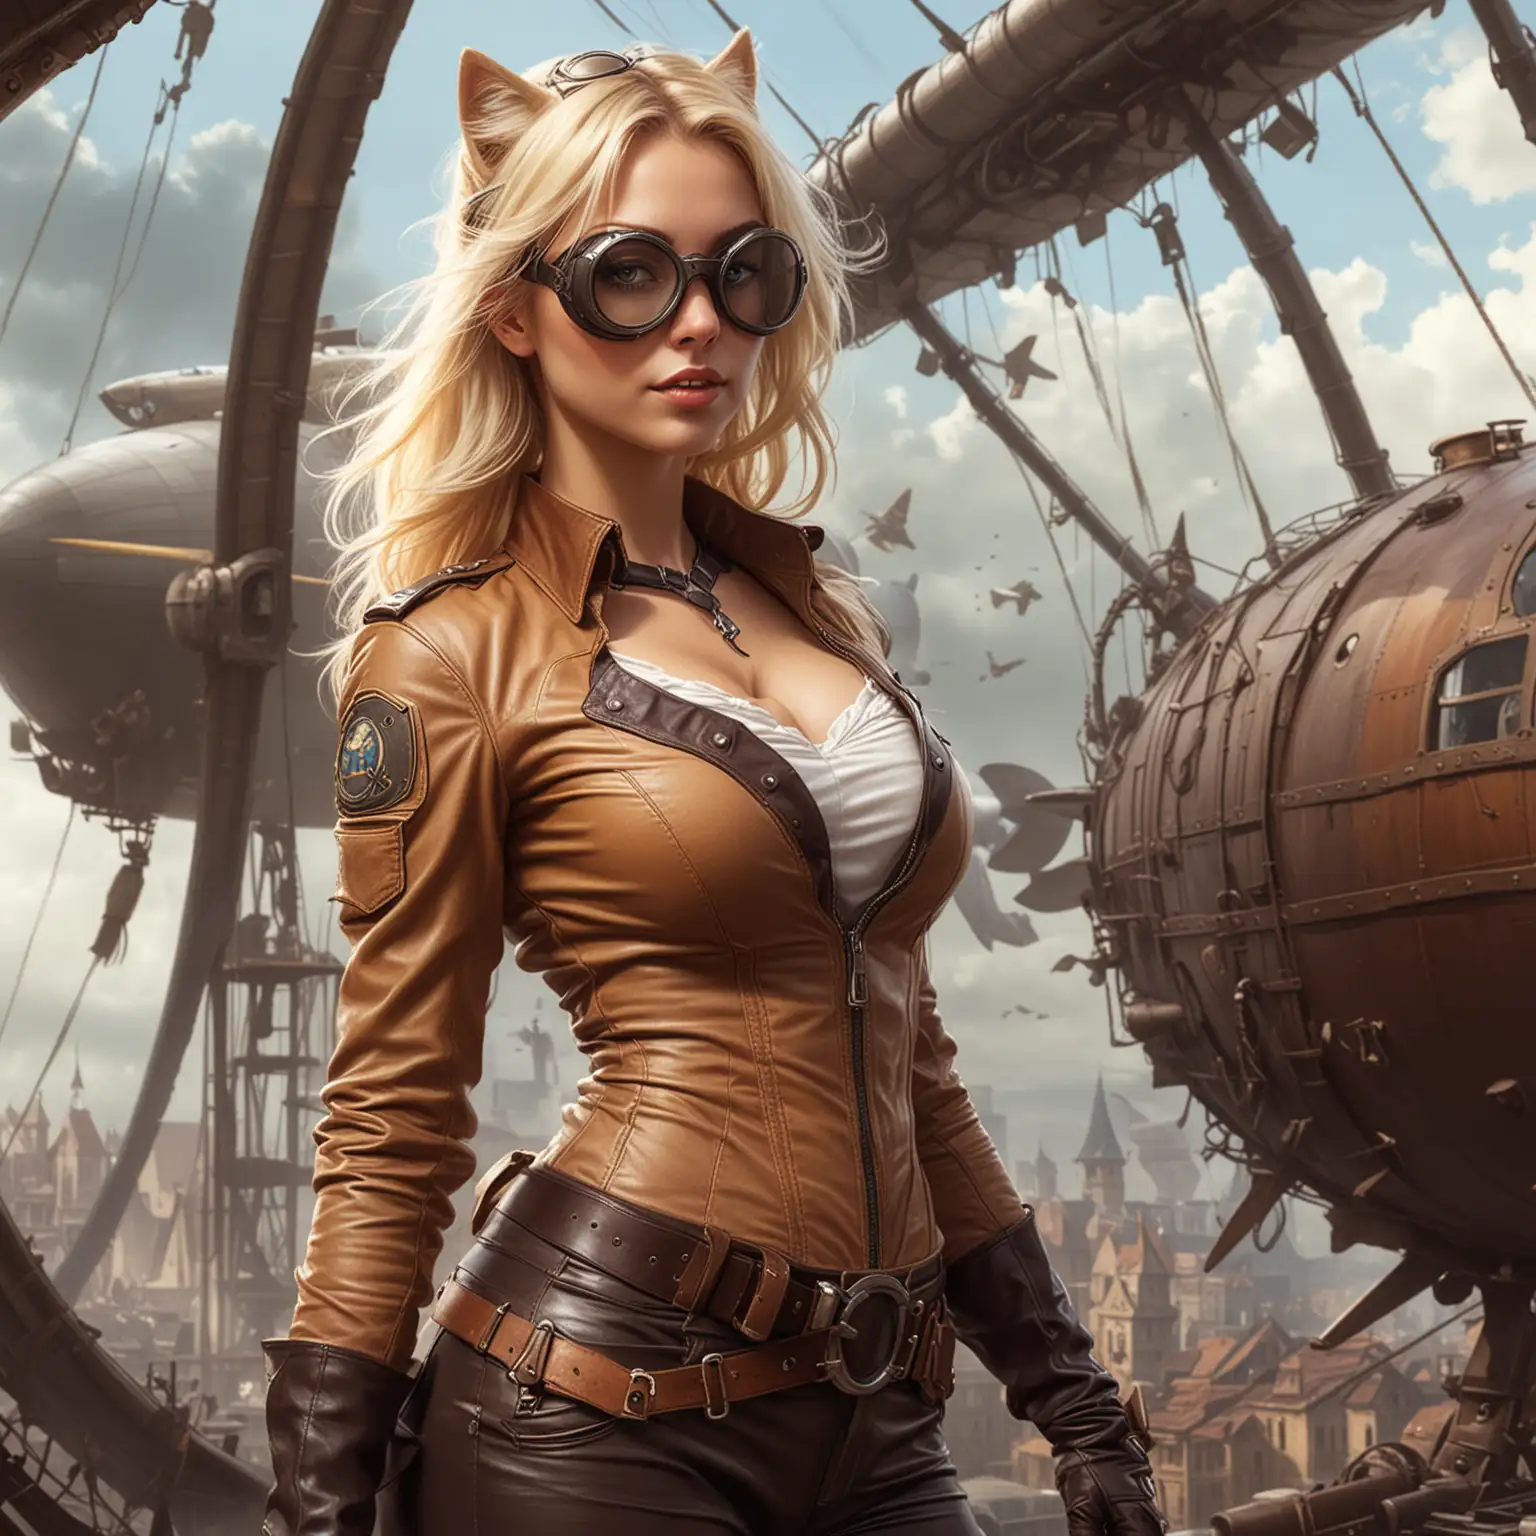 Medieval steampunk artificer catgirl pilot, she's blonde with oversized heavy leather gloves and dirty aviation goggles. Her tan unbuttoned shirt is busting out with deep cleavage. In the background a strange arcane airship floats out a window on magical currents of energy